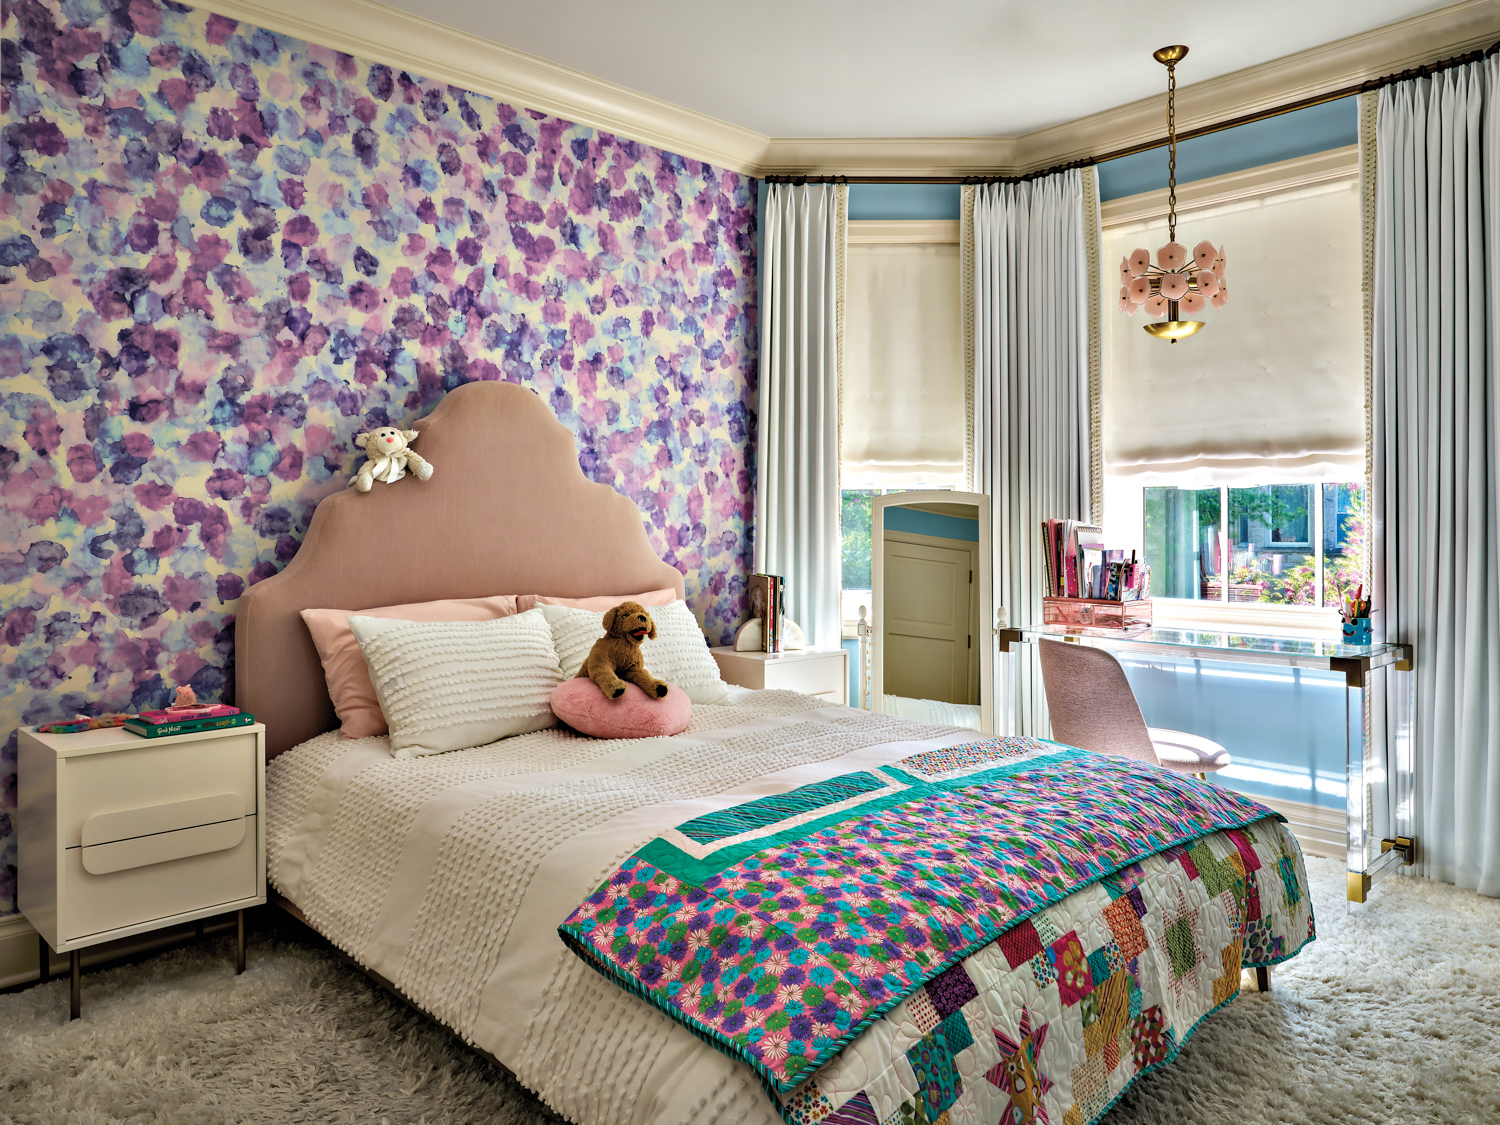 Child's bedroom with purple floral...